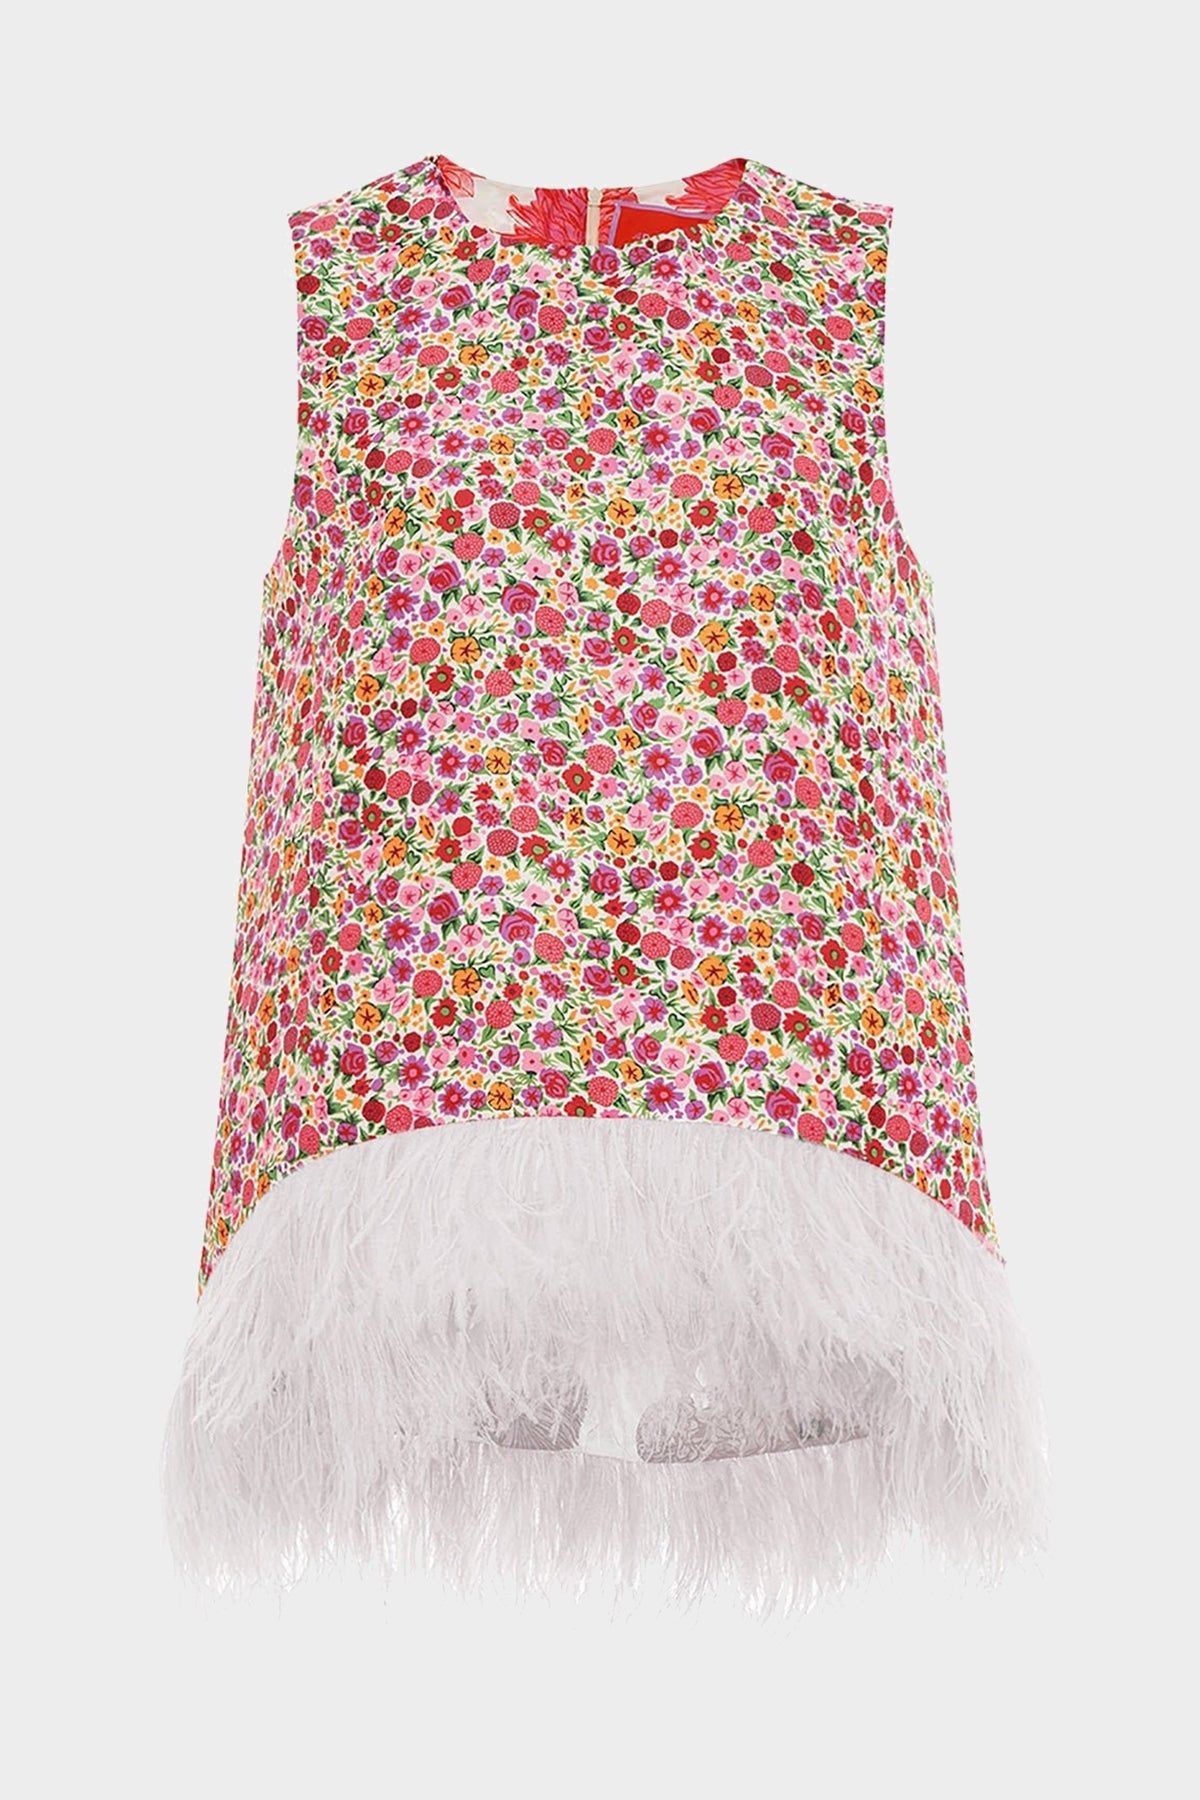 La Scala Top (With Feathers) in Zia - shop-olivia.com